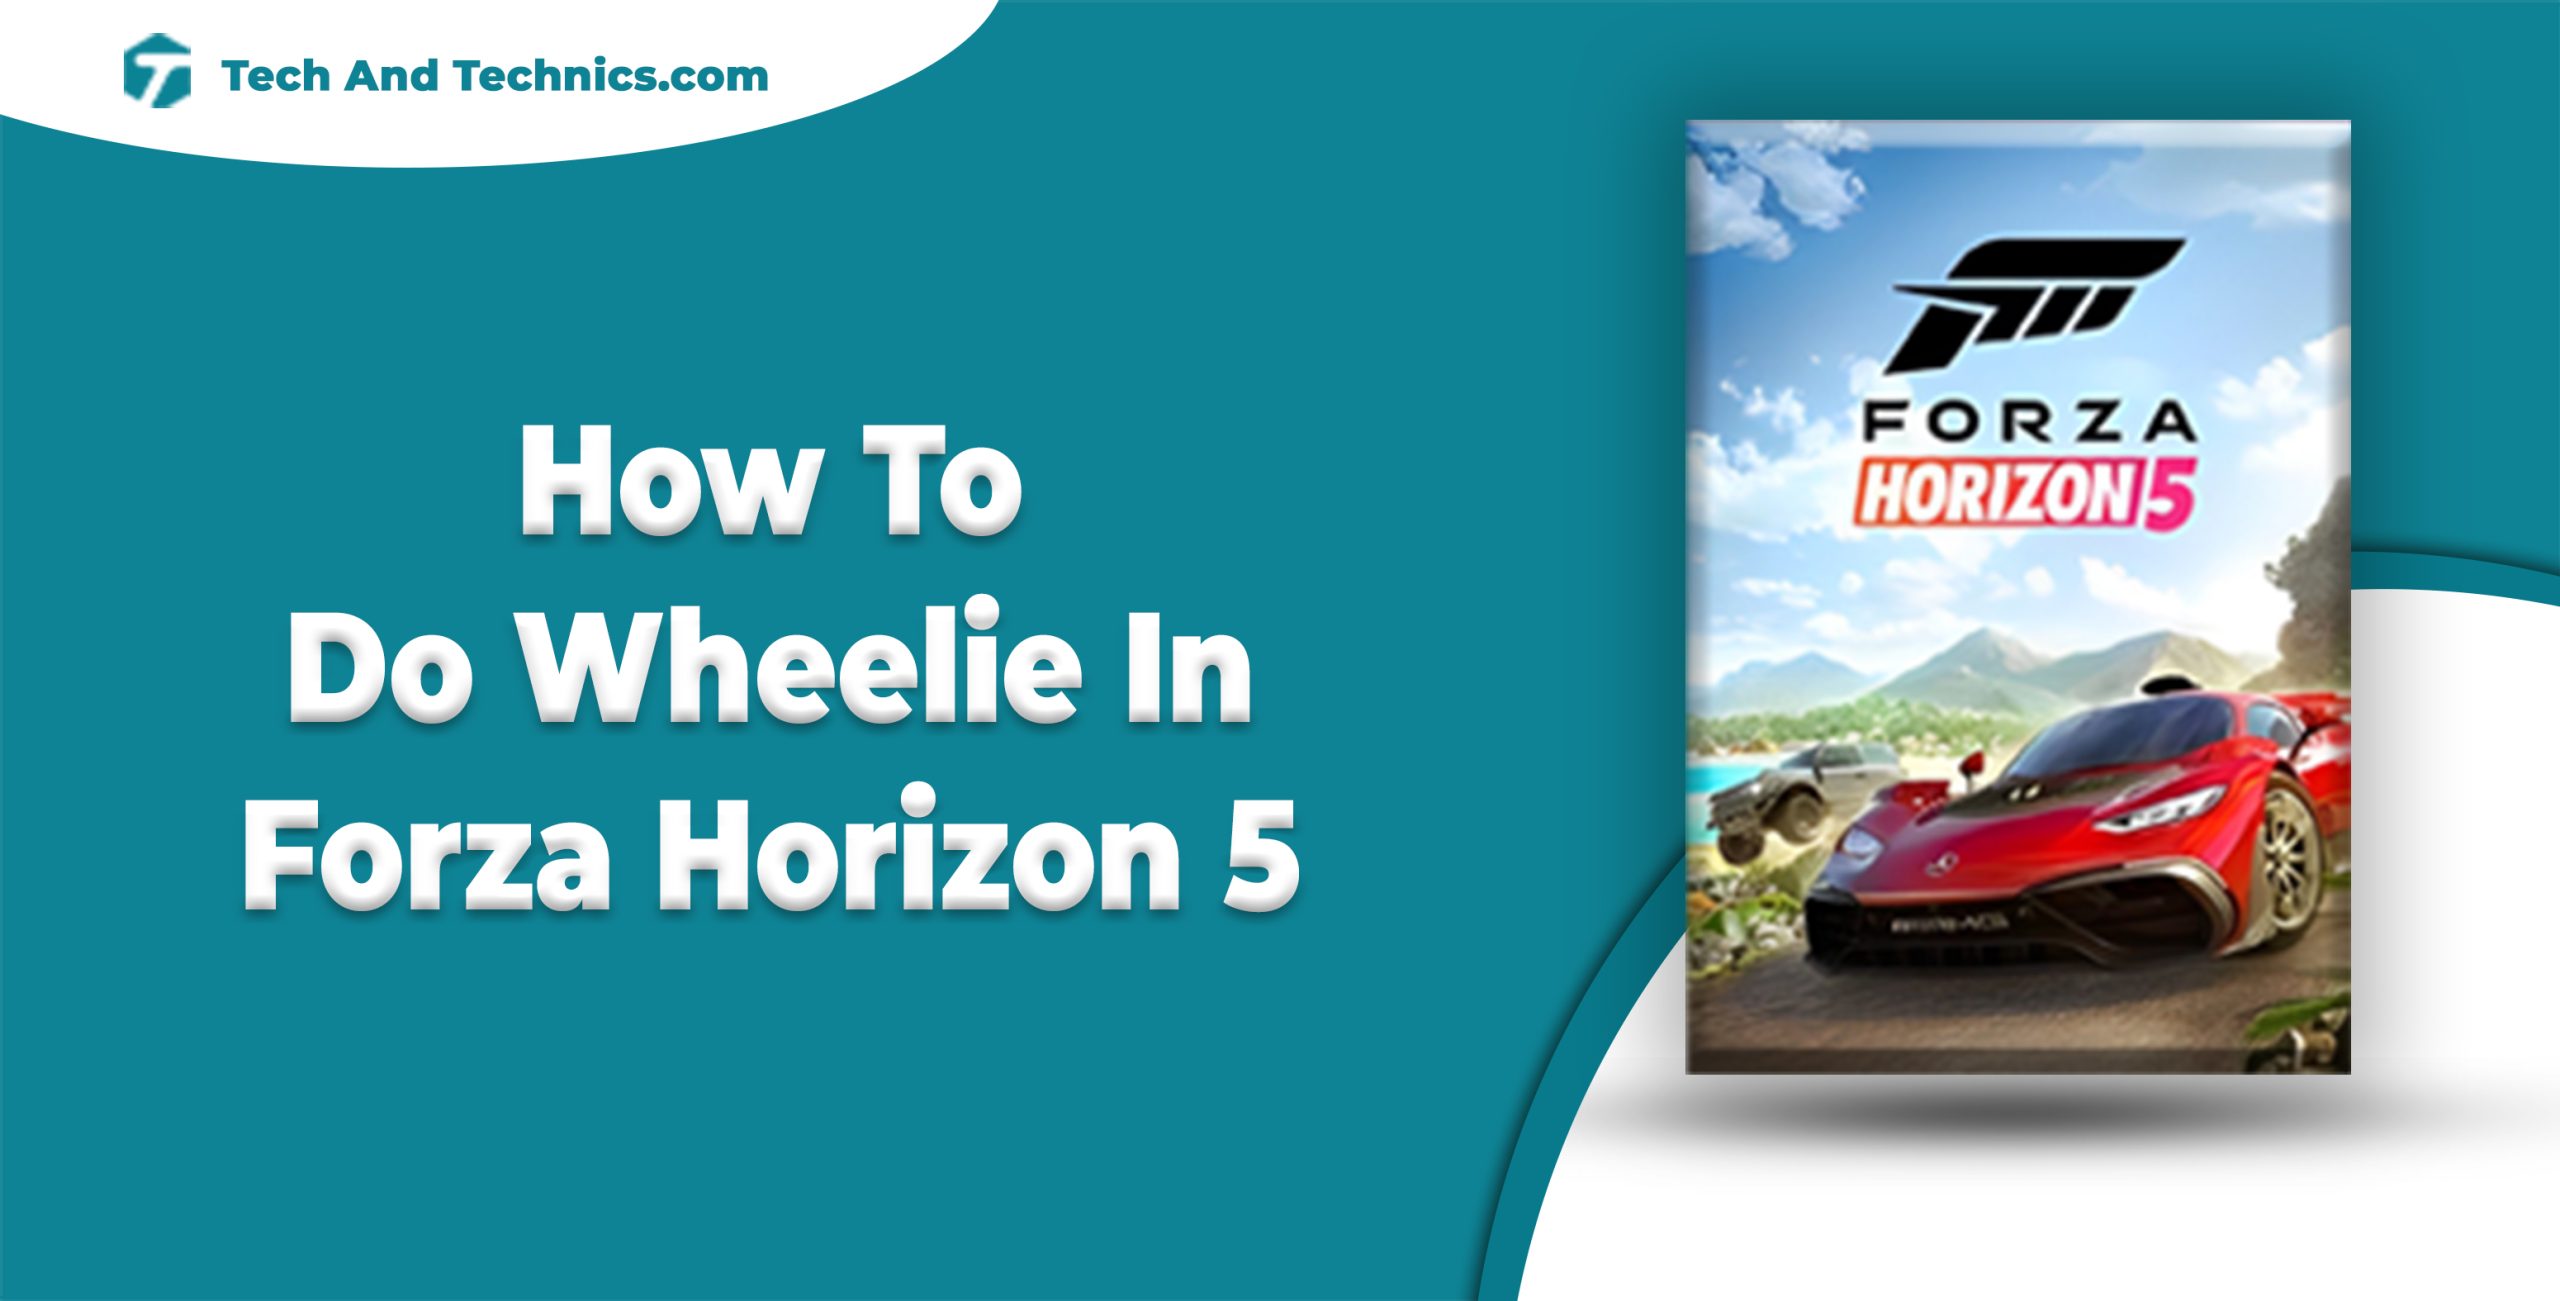 How To Do Wheelie In Forza Horizon 5 (Step-By-Step Guide)